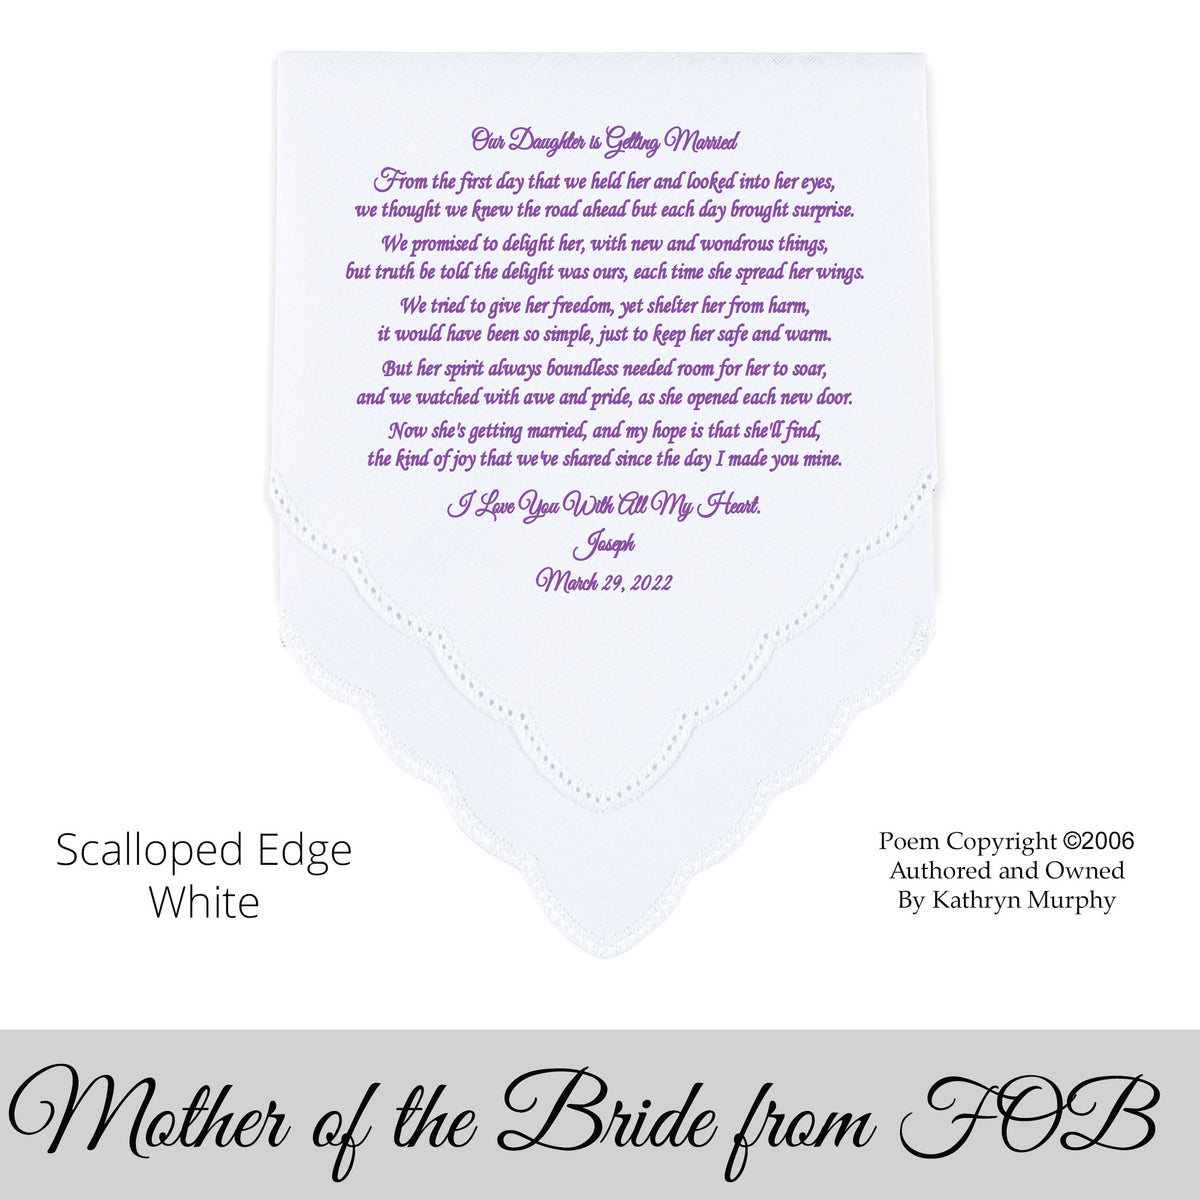 gift for the mother of the bride. Wedding Hankie with printed poem from the father of the bride